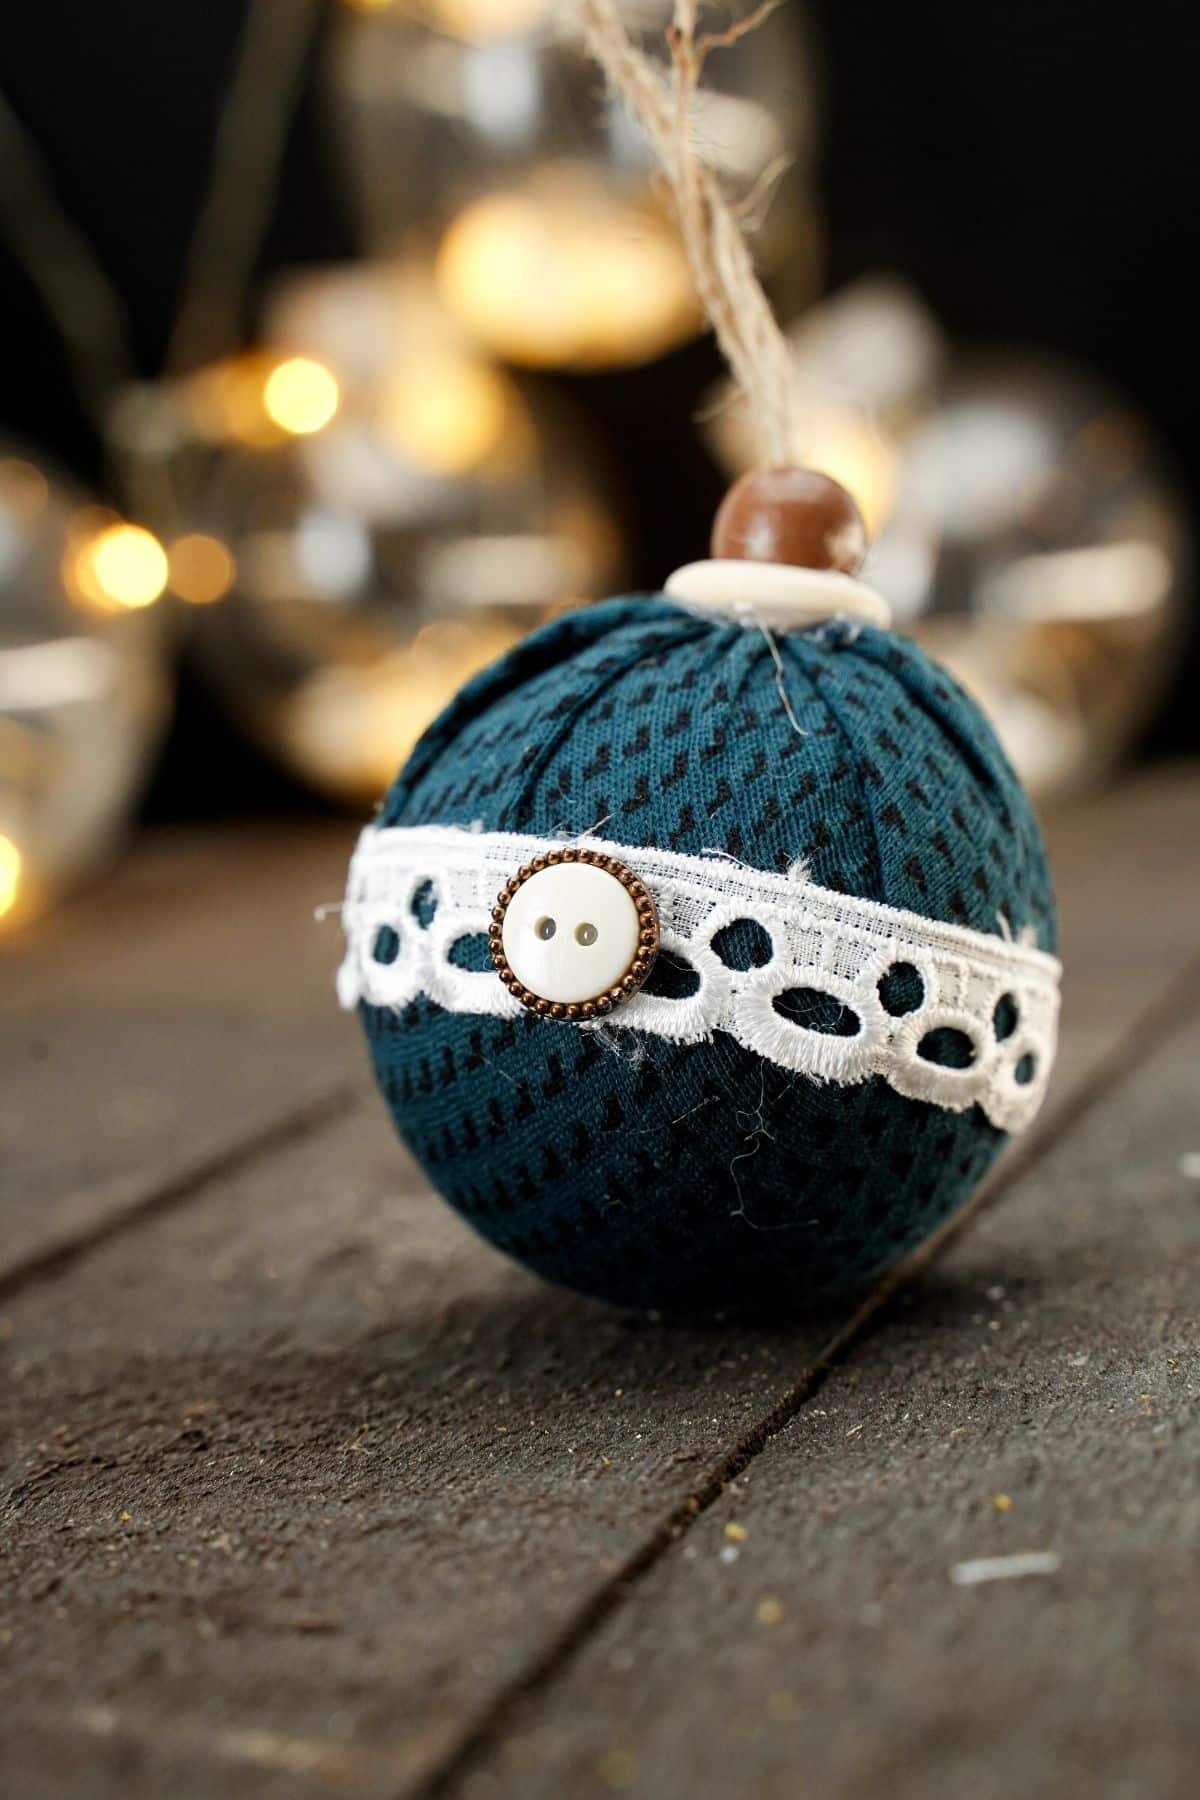 fabric ball ornament on wood table with lights in background